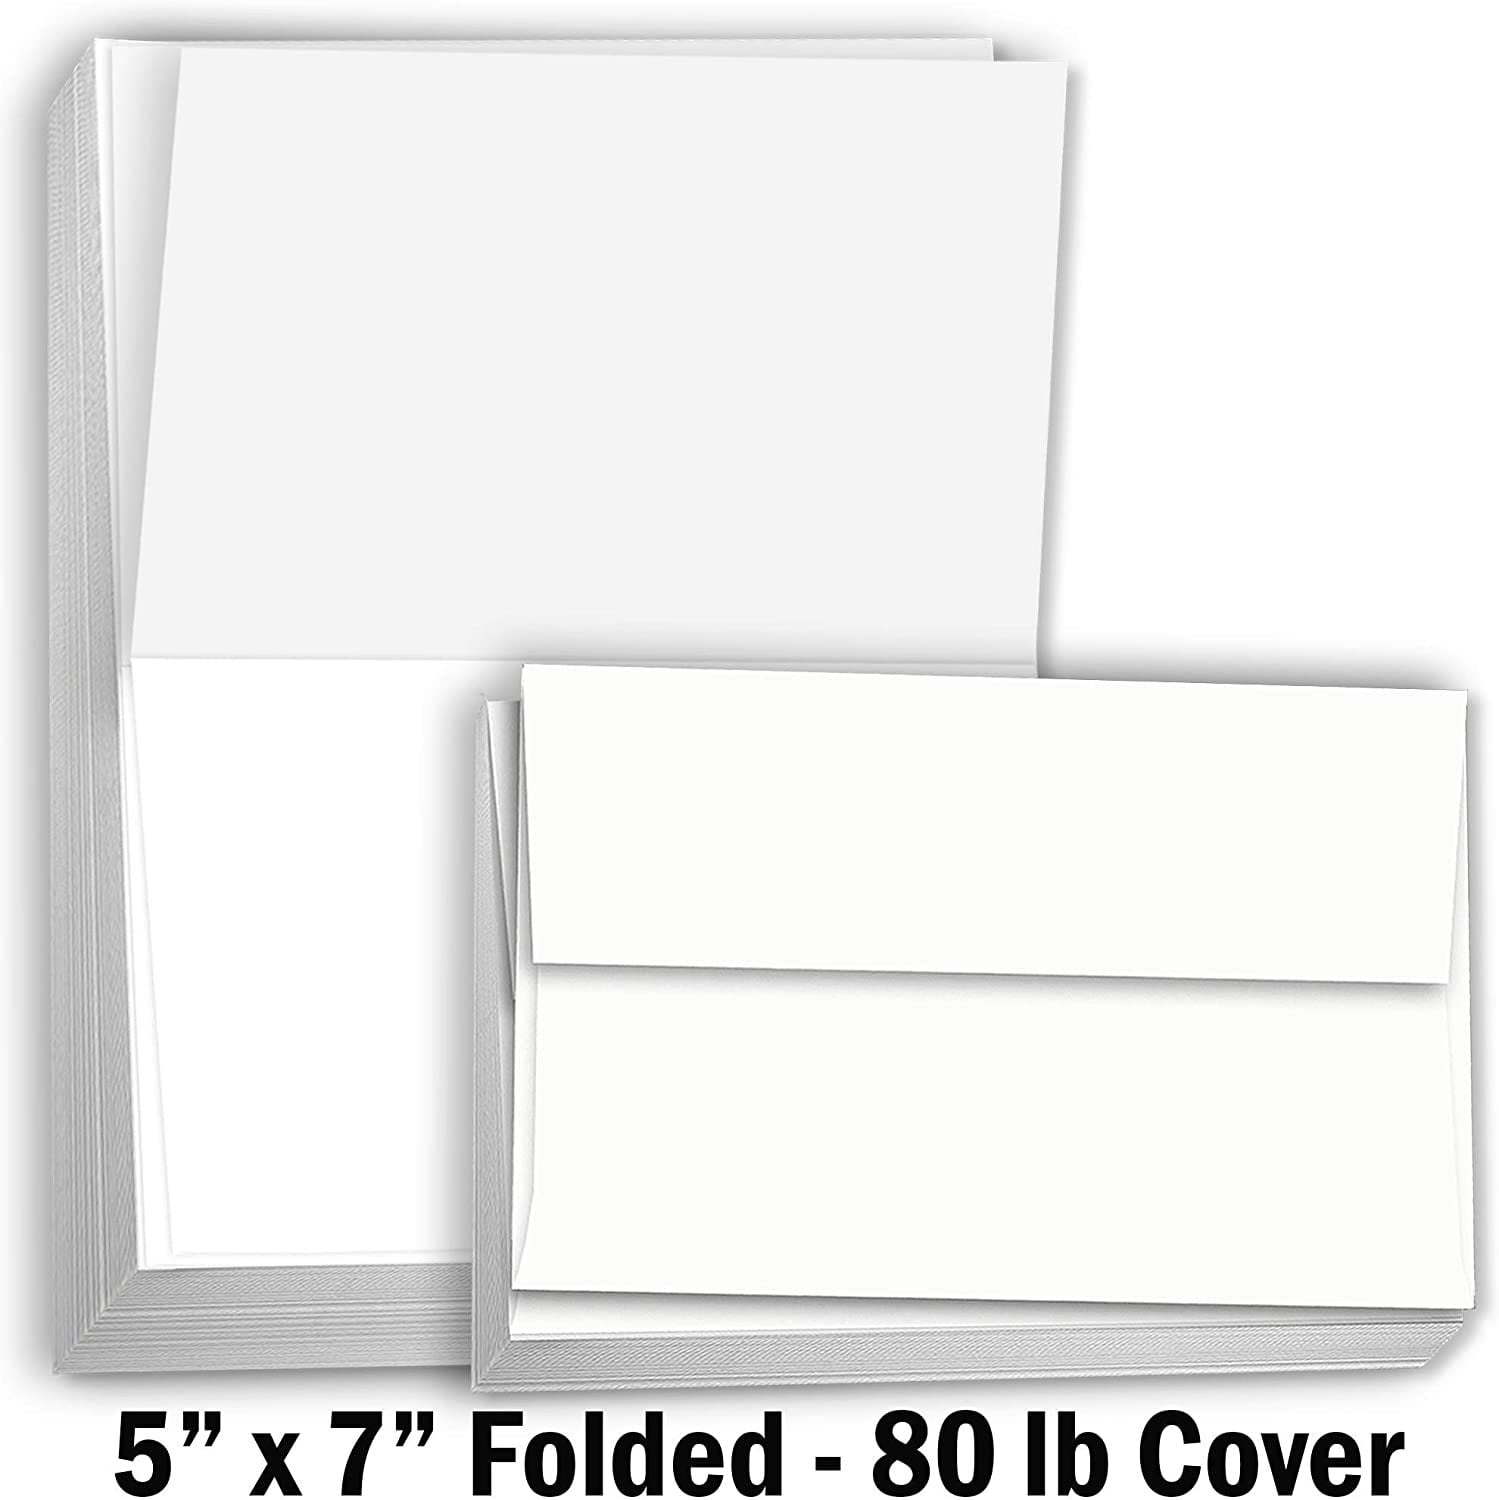 hamilco-card-stock-folded-blank-cards-with-envelopes-5x7-scored-white